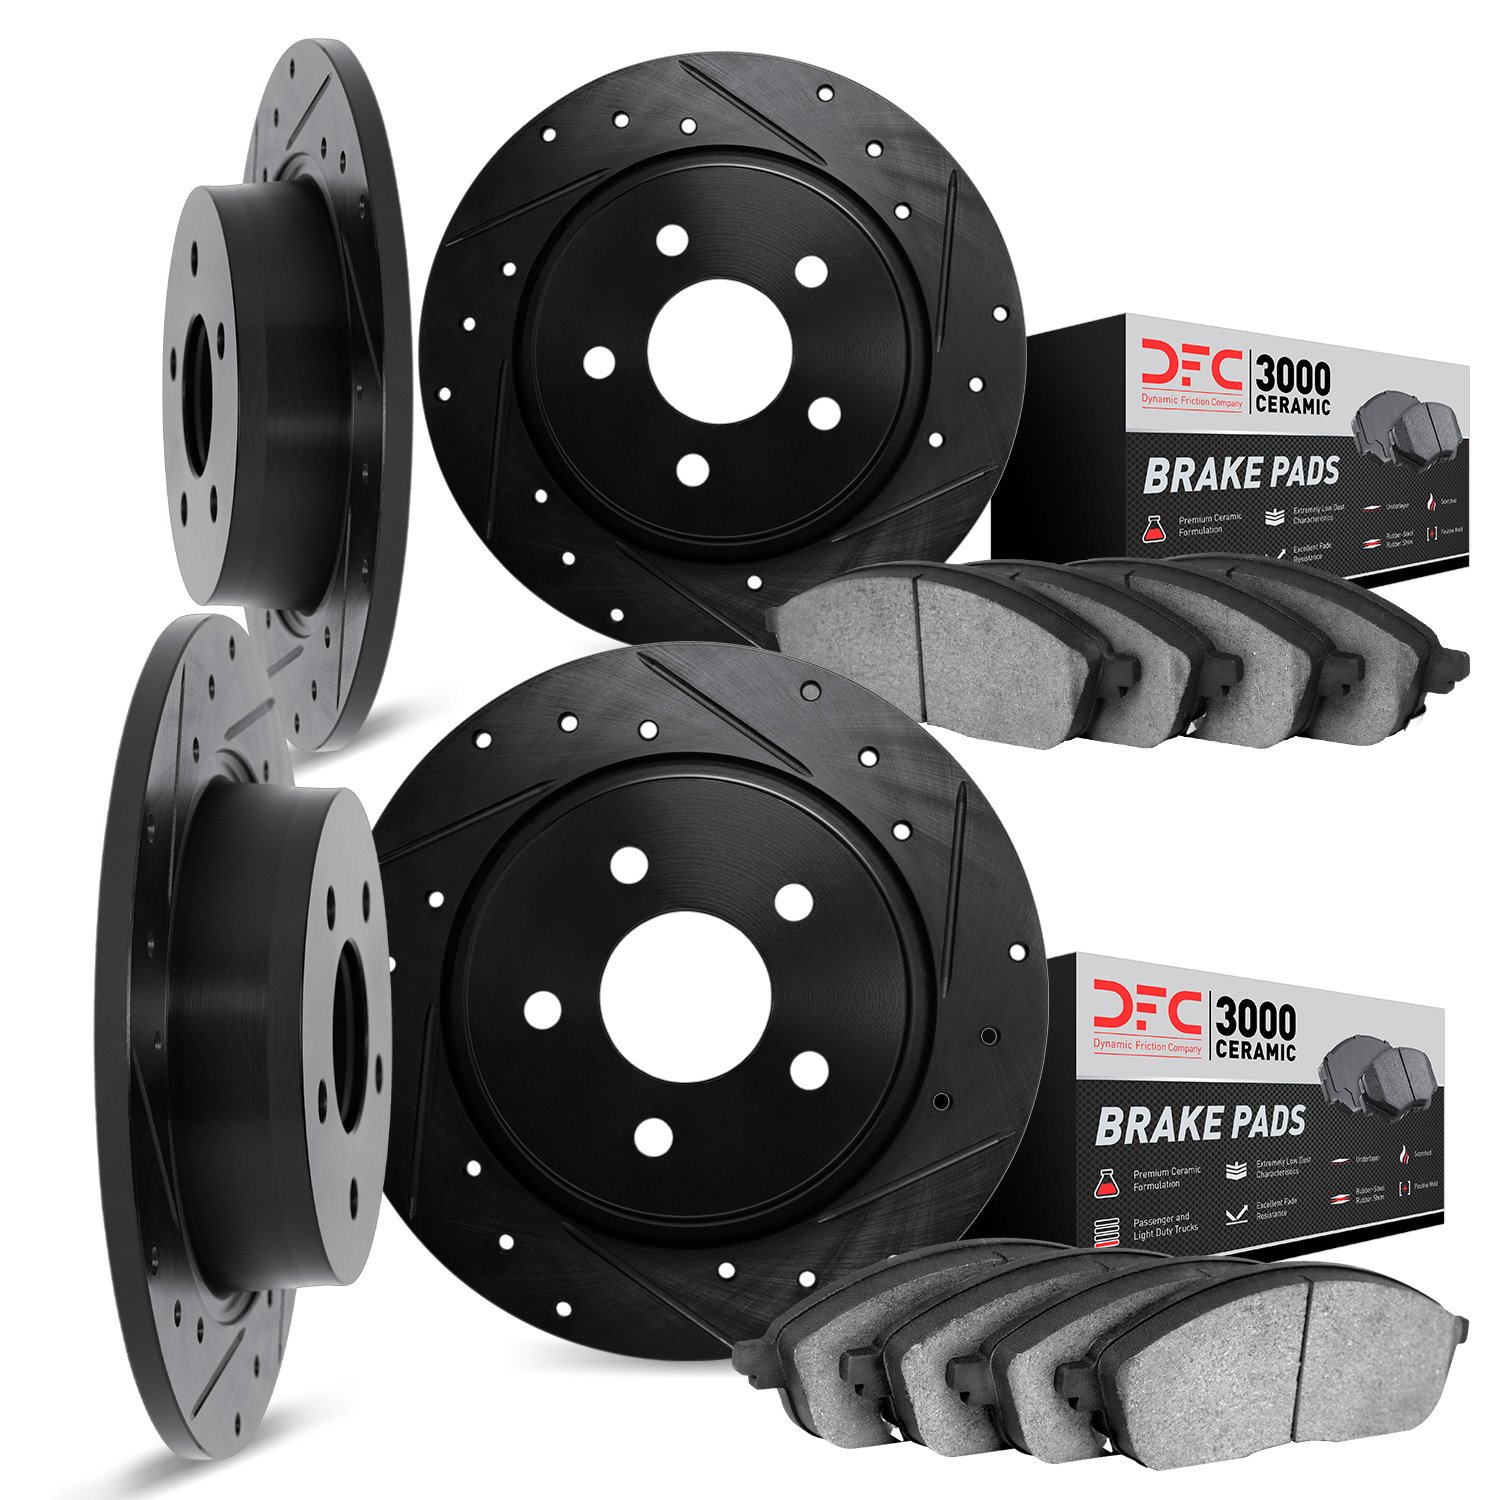 8304-63006 Drilled/Slotted Brake Rotors with 3000-Series Ceramic Brake Pads Kit [Black], 1965-1973 Mercedes-Benz, Position: Fron